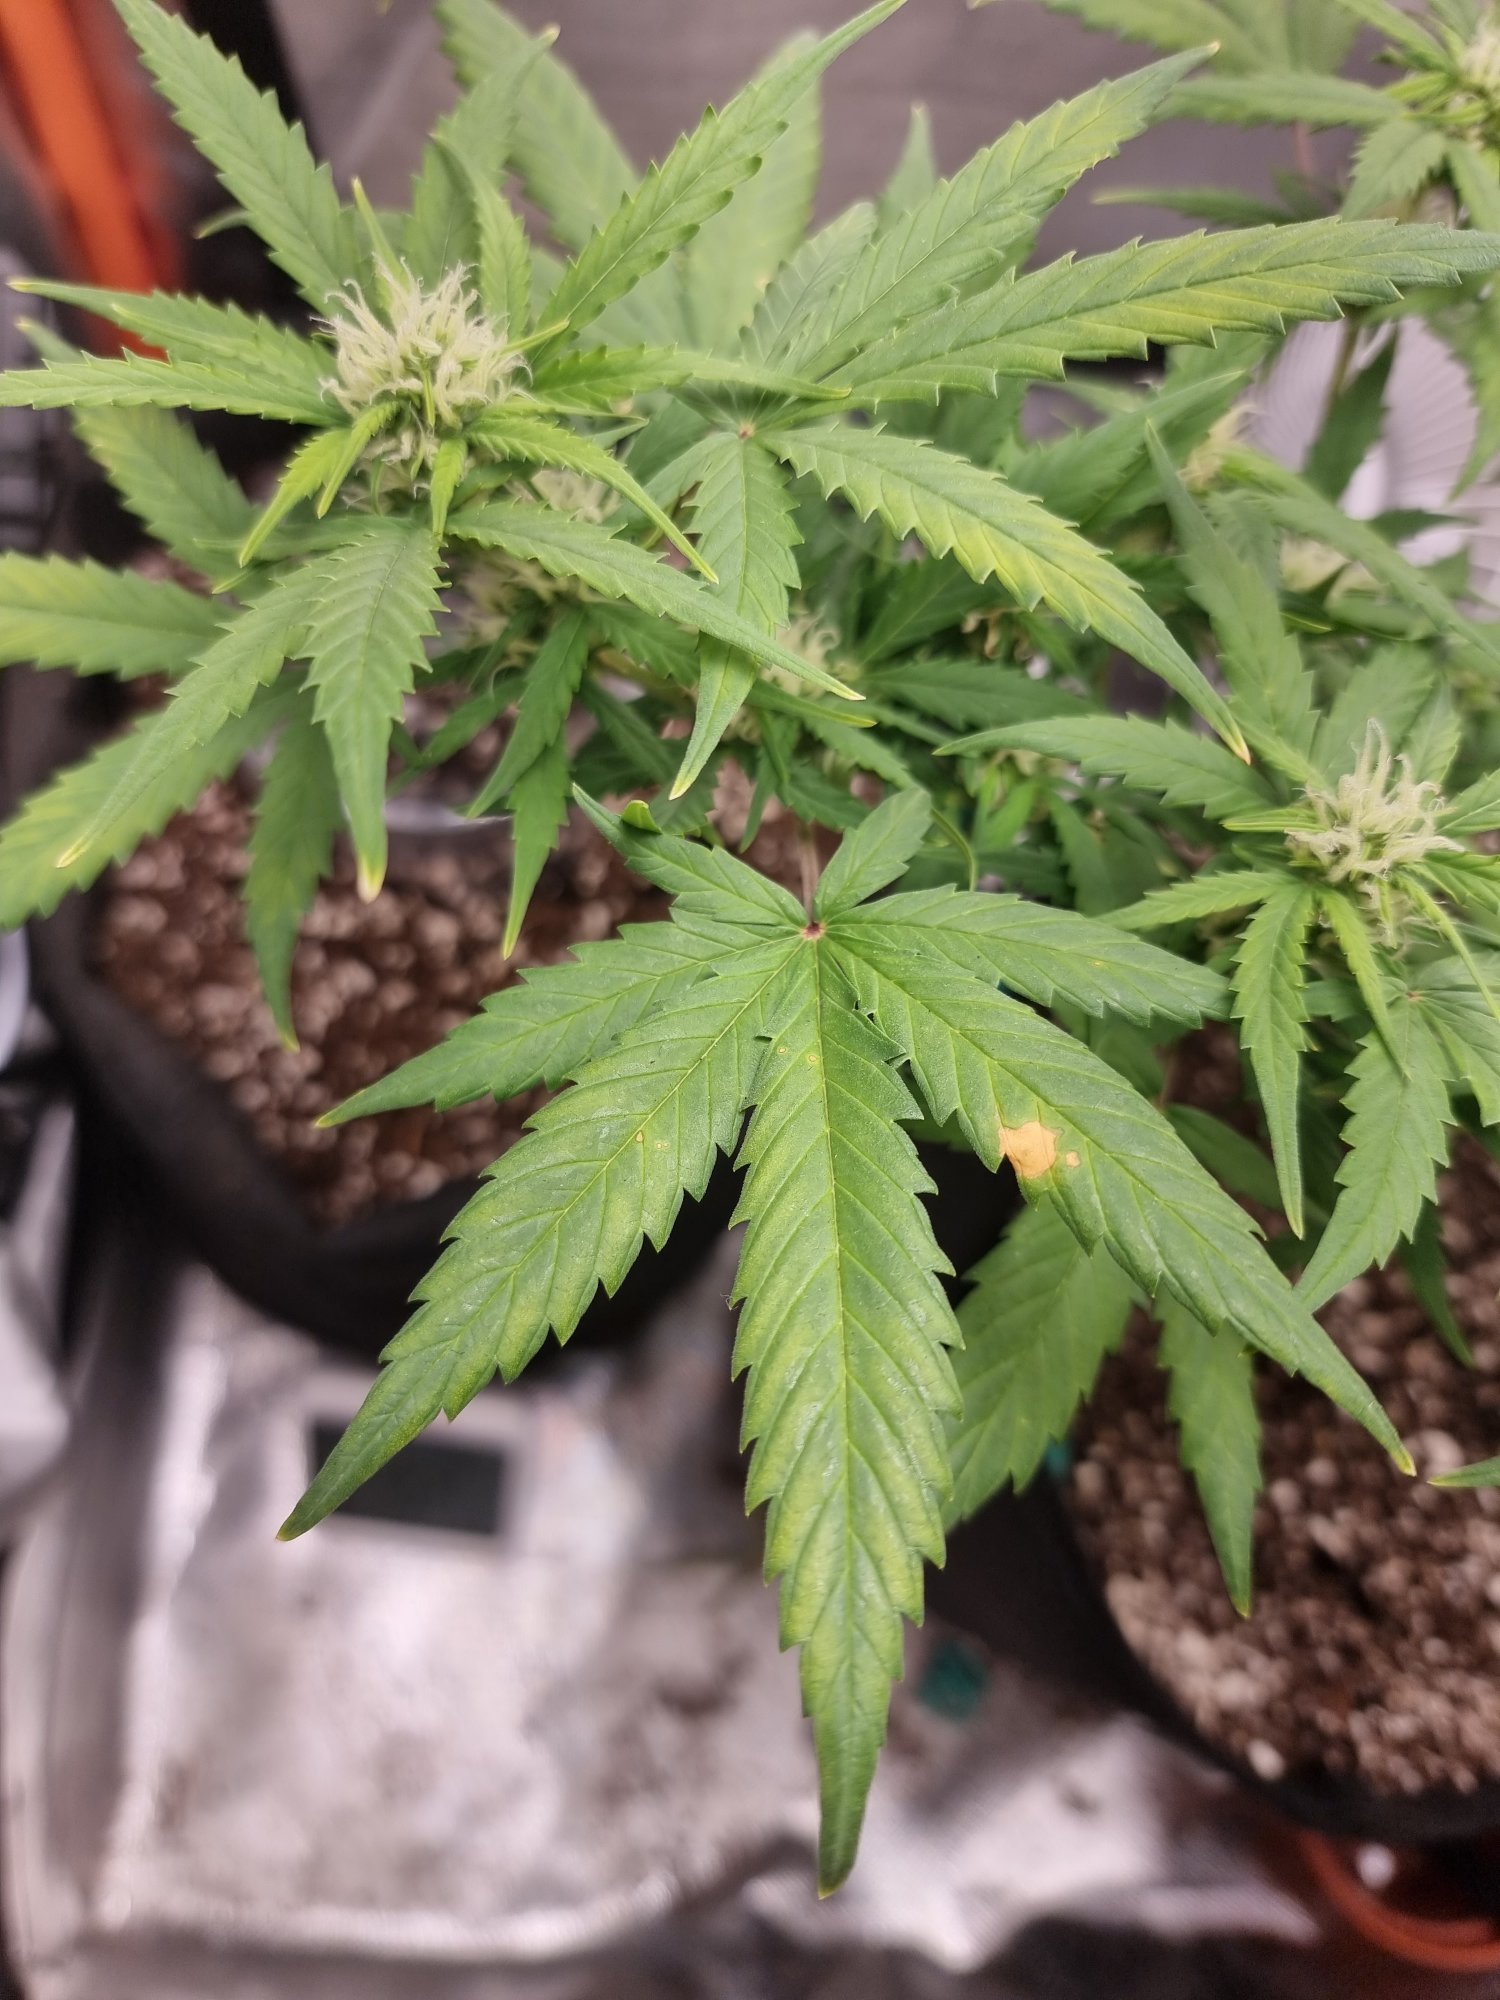 Day 38 northern lights autoflower yellowing leaves and brown spots